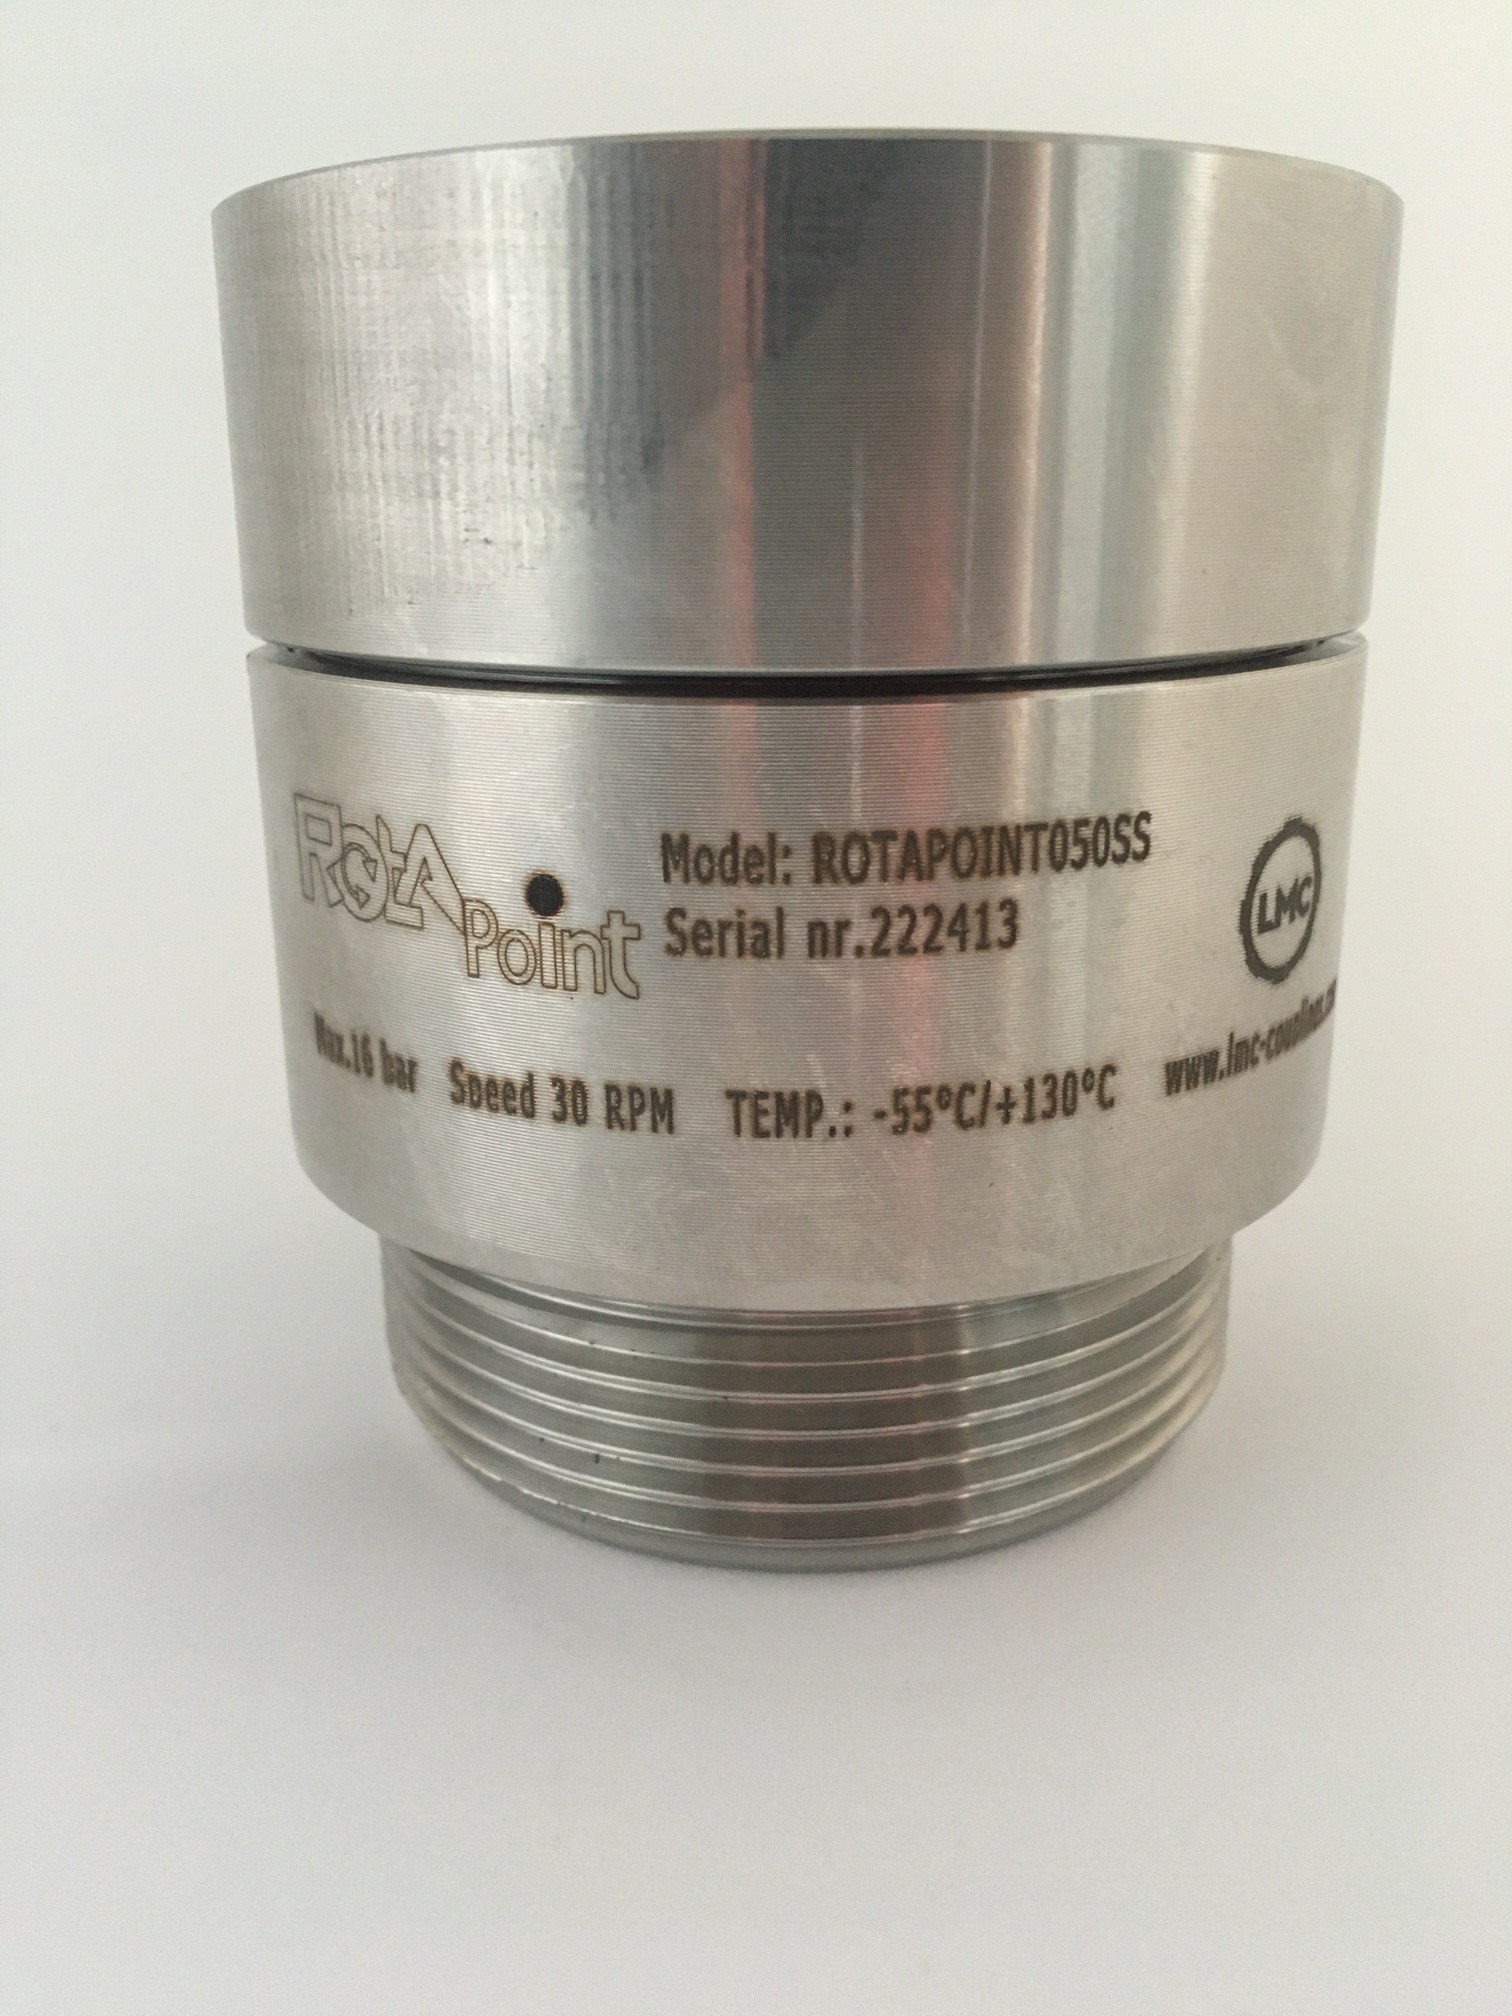 LMC manufactures Rotapoint® swivel couplings